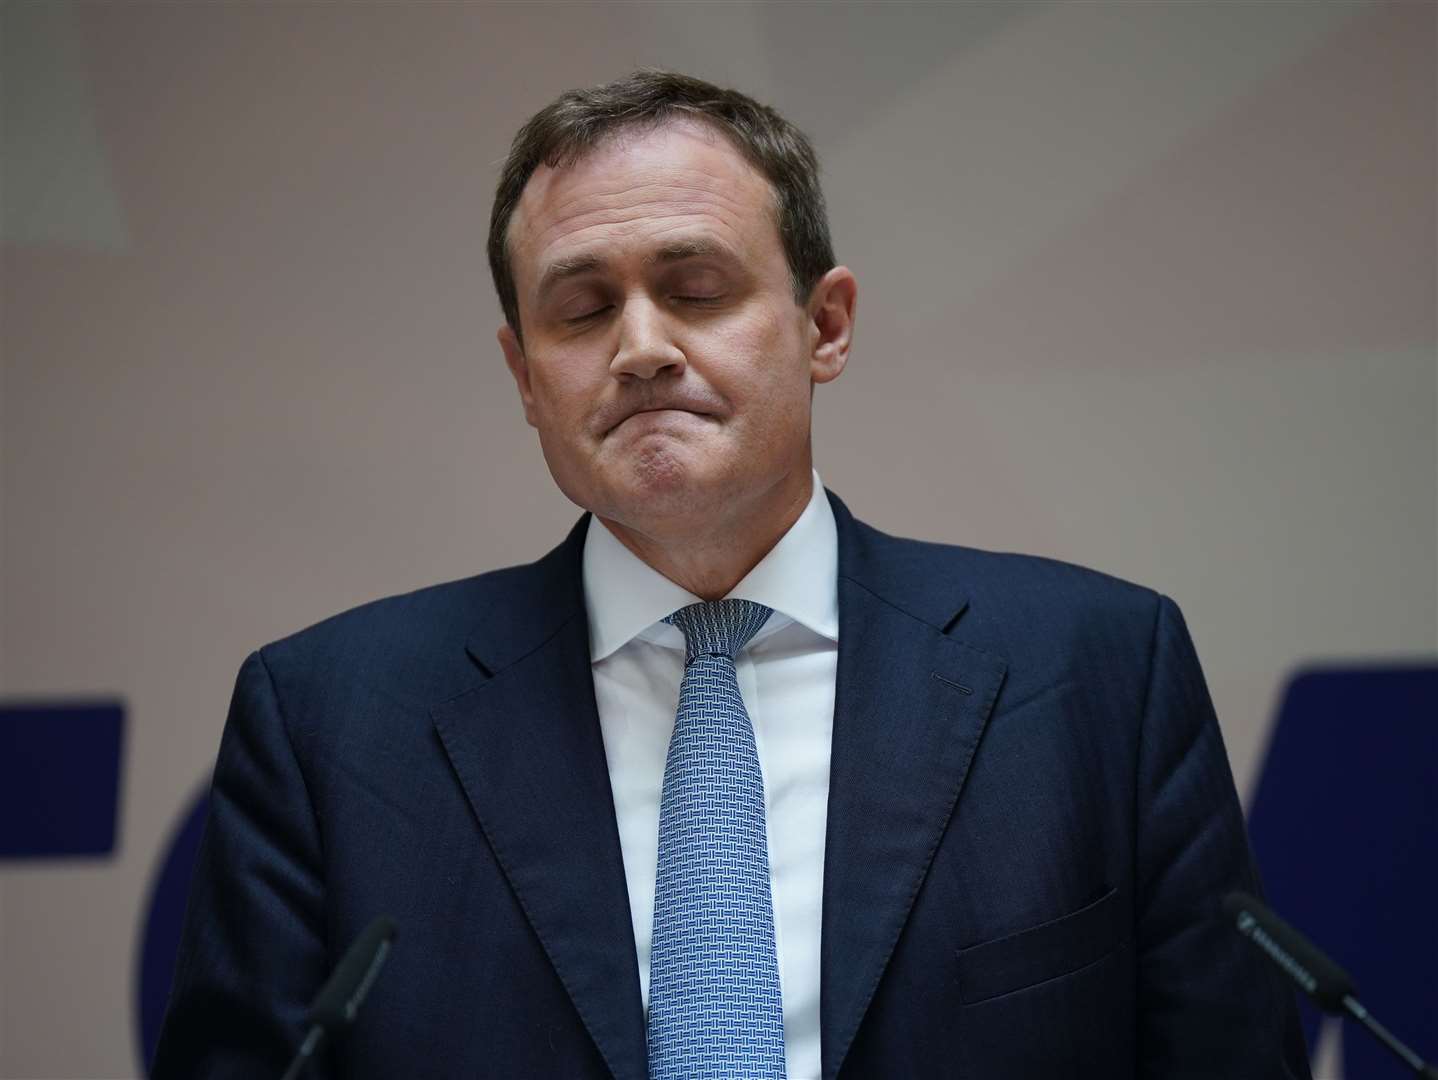 Tom Tugendhat, who put his military service at the centre of his campaign, was eliminated on Monday (Yui Mok/PA)